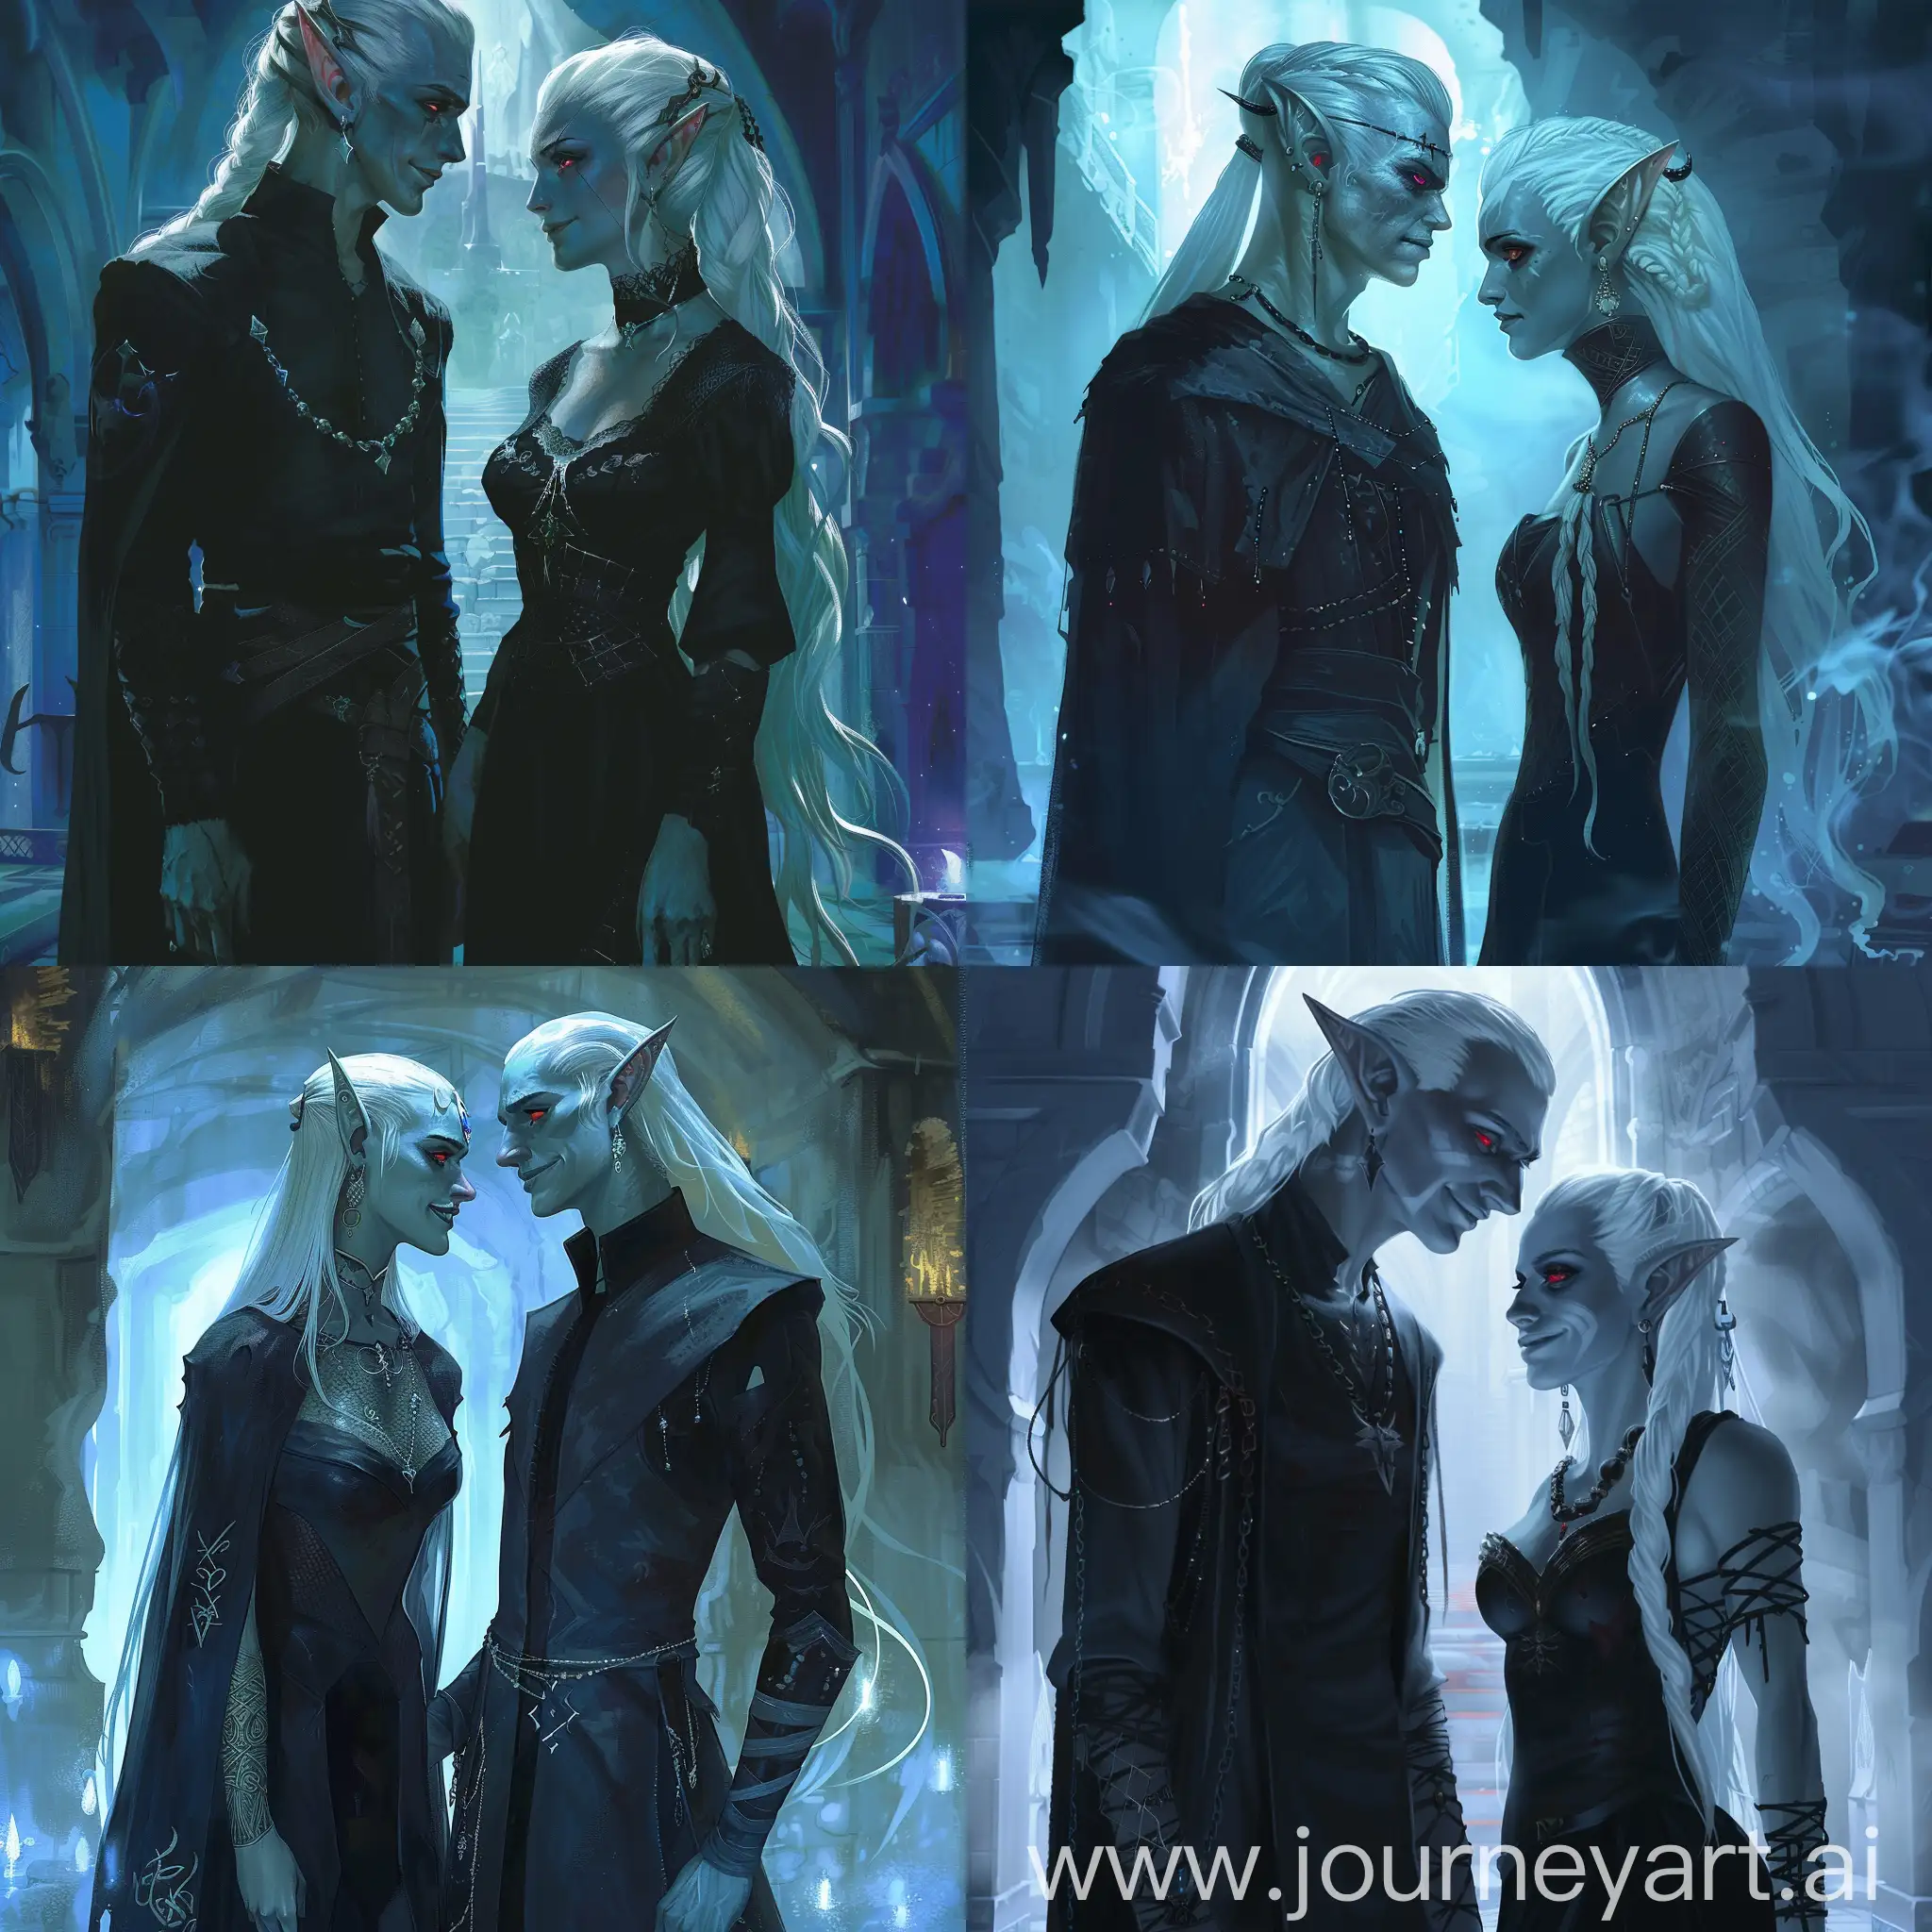 Drow-Siblings-in-Underground-Temple-Handsome-Rogue-and-Beautiful-Woman-Exchange-Glances